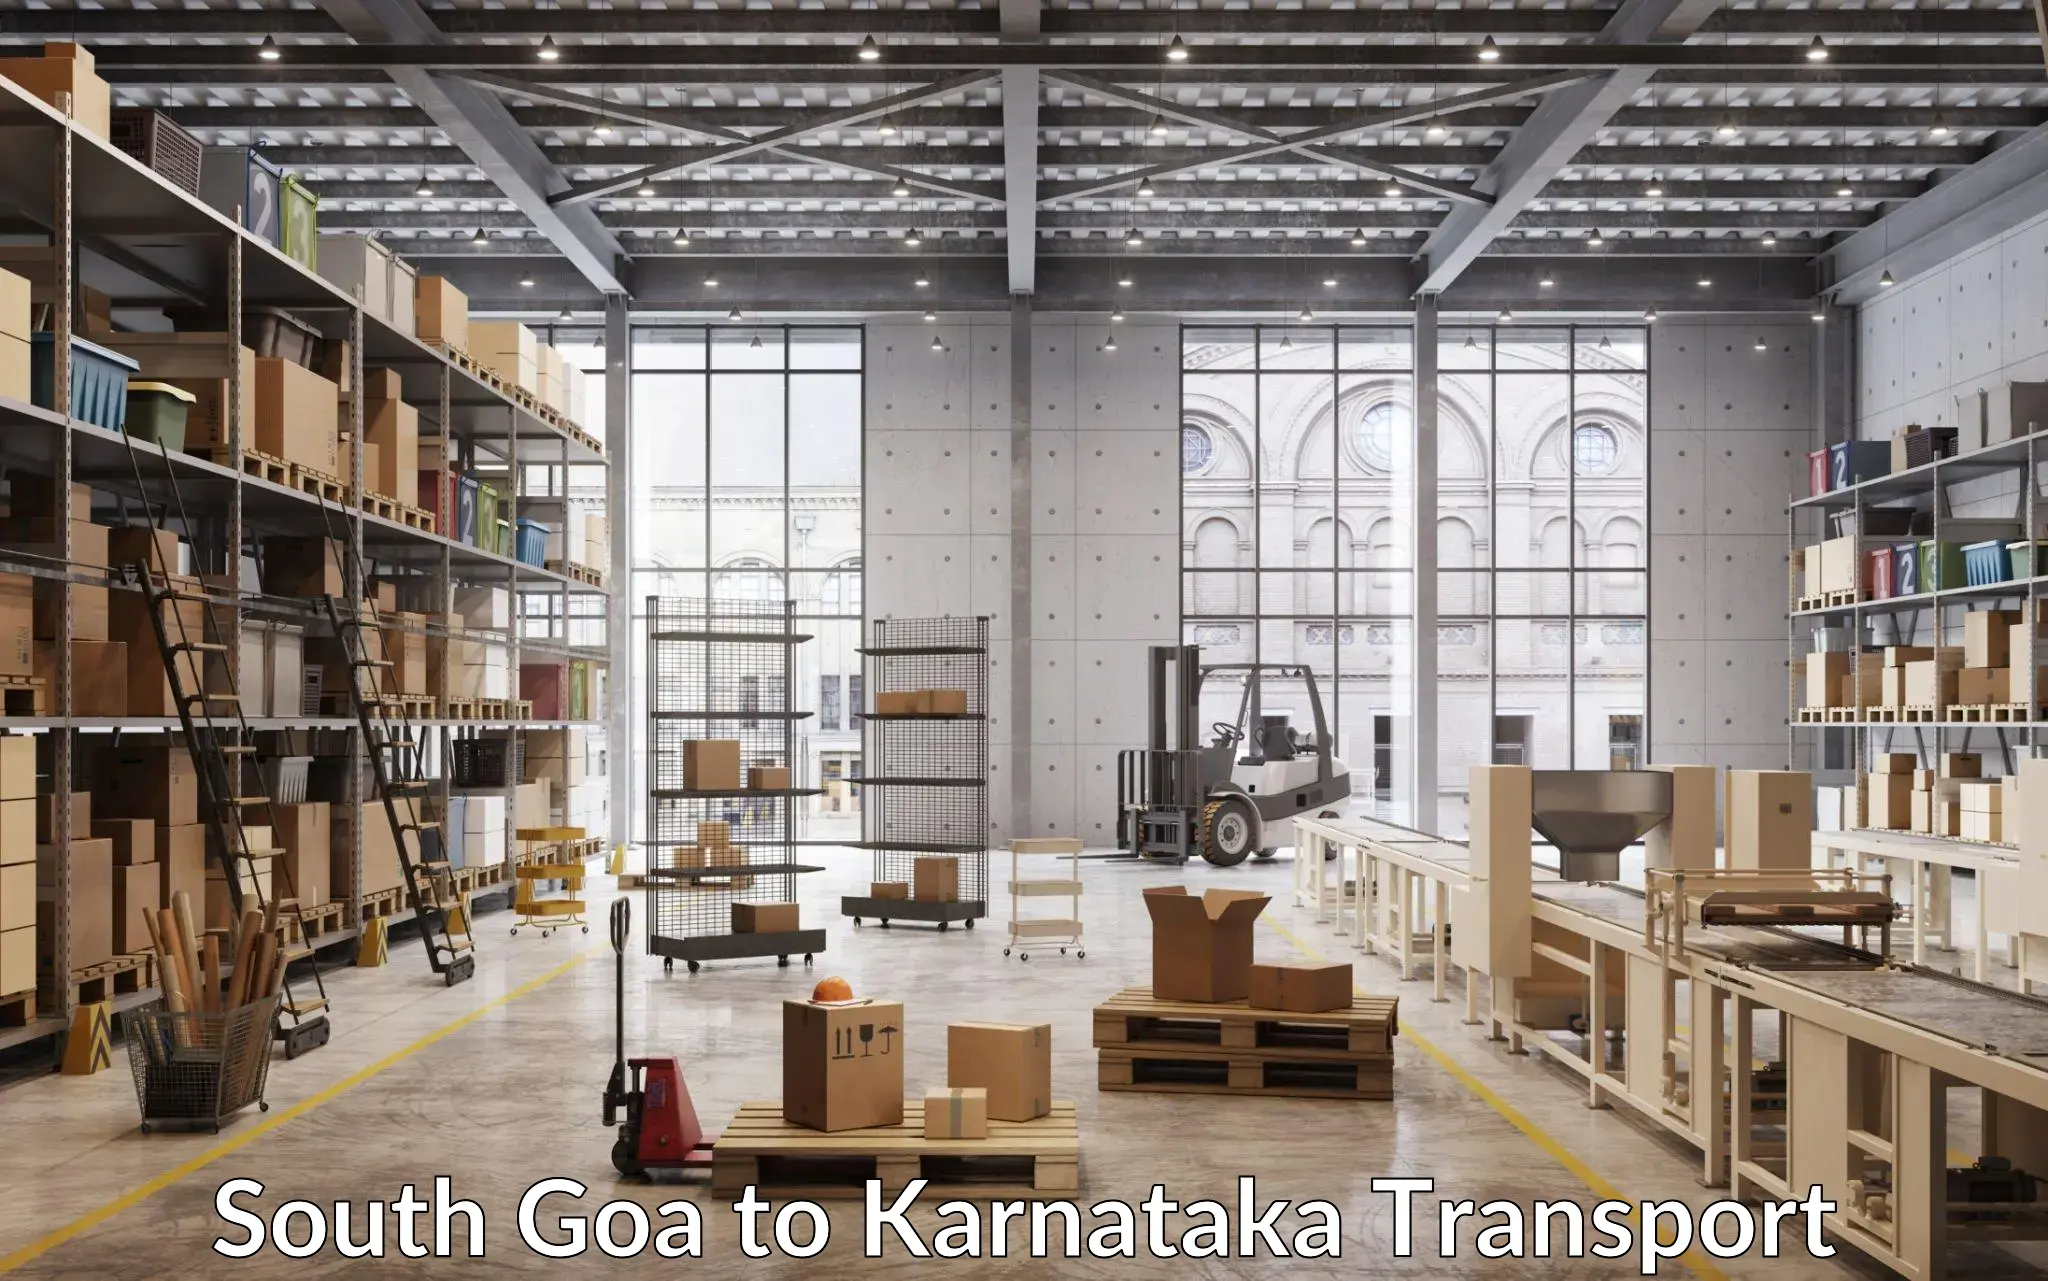 Container transport service South Goa to Mandya